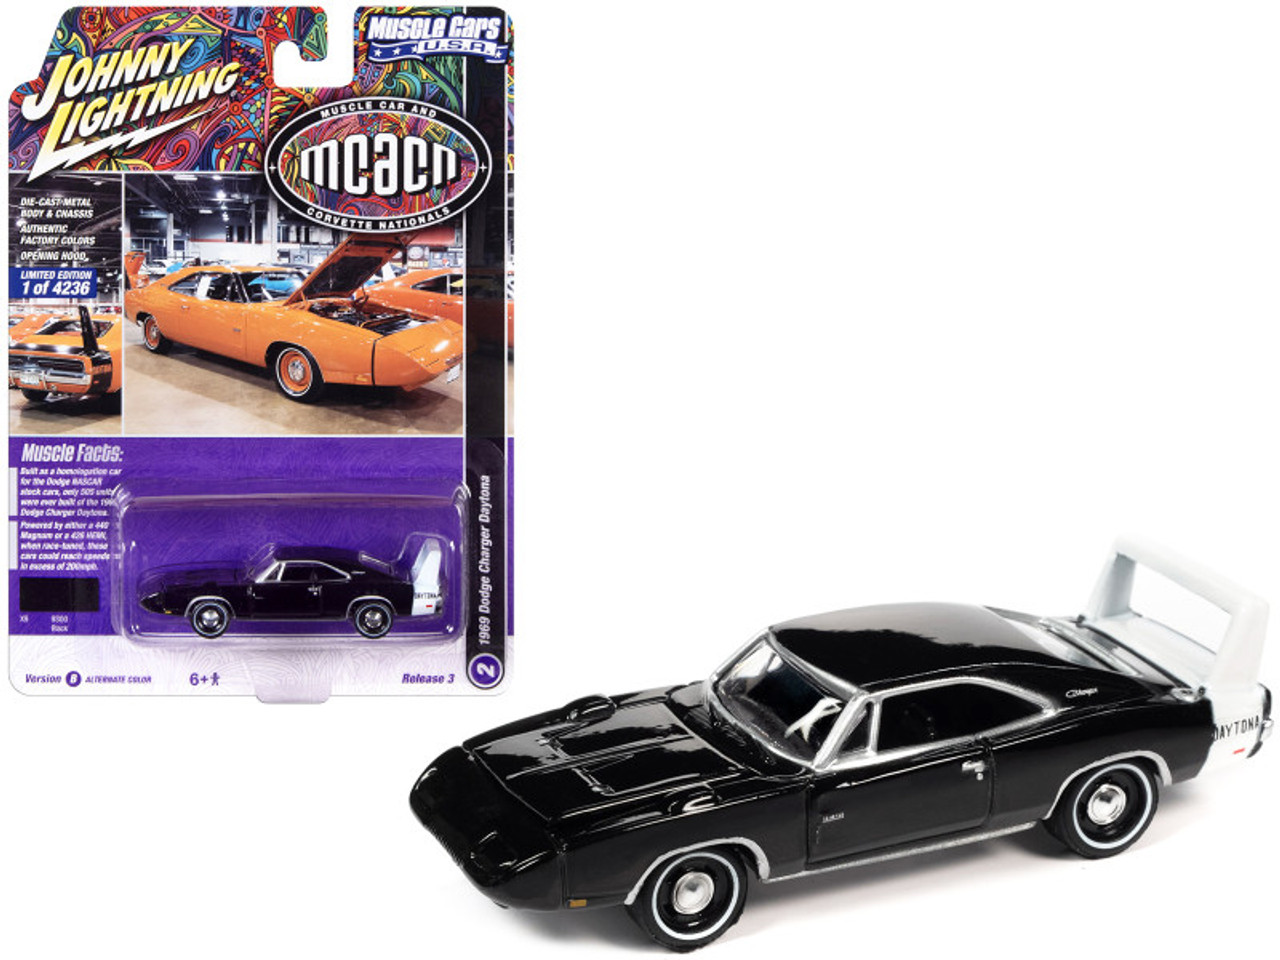 1969 Dodge Charger Daytona Black with White Tail Stripe "MCACN (Muscle Car and Corvette Nationals)" Limited Edition to 4236 pieces Worldwide "Muscle Cars USA" Series 1/64 Diecast Model Car by Johnny Lightning